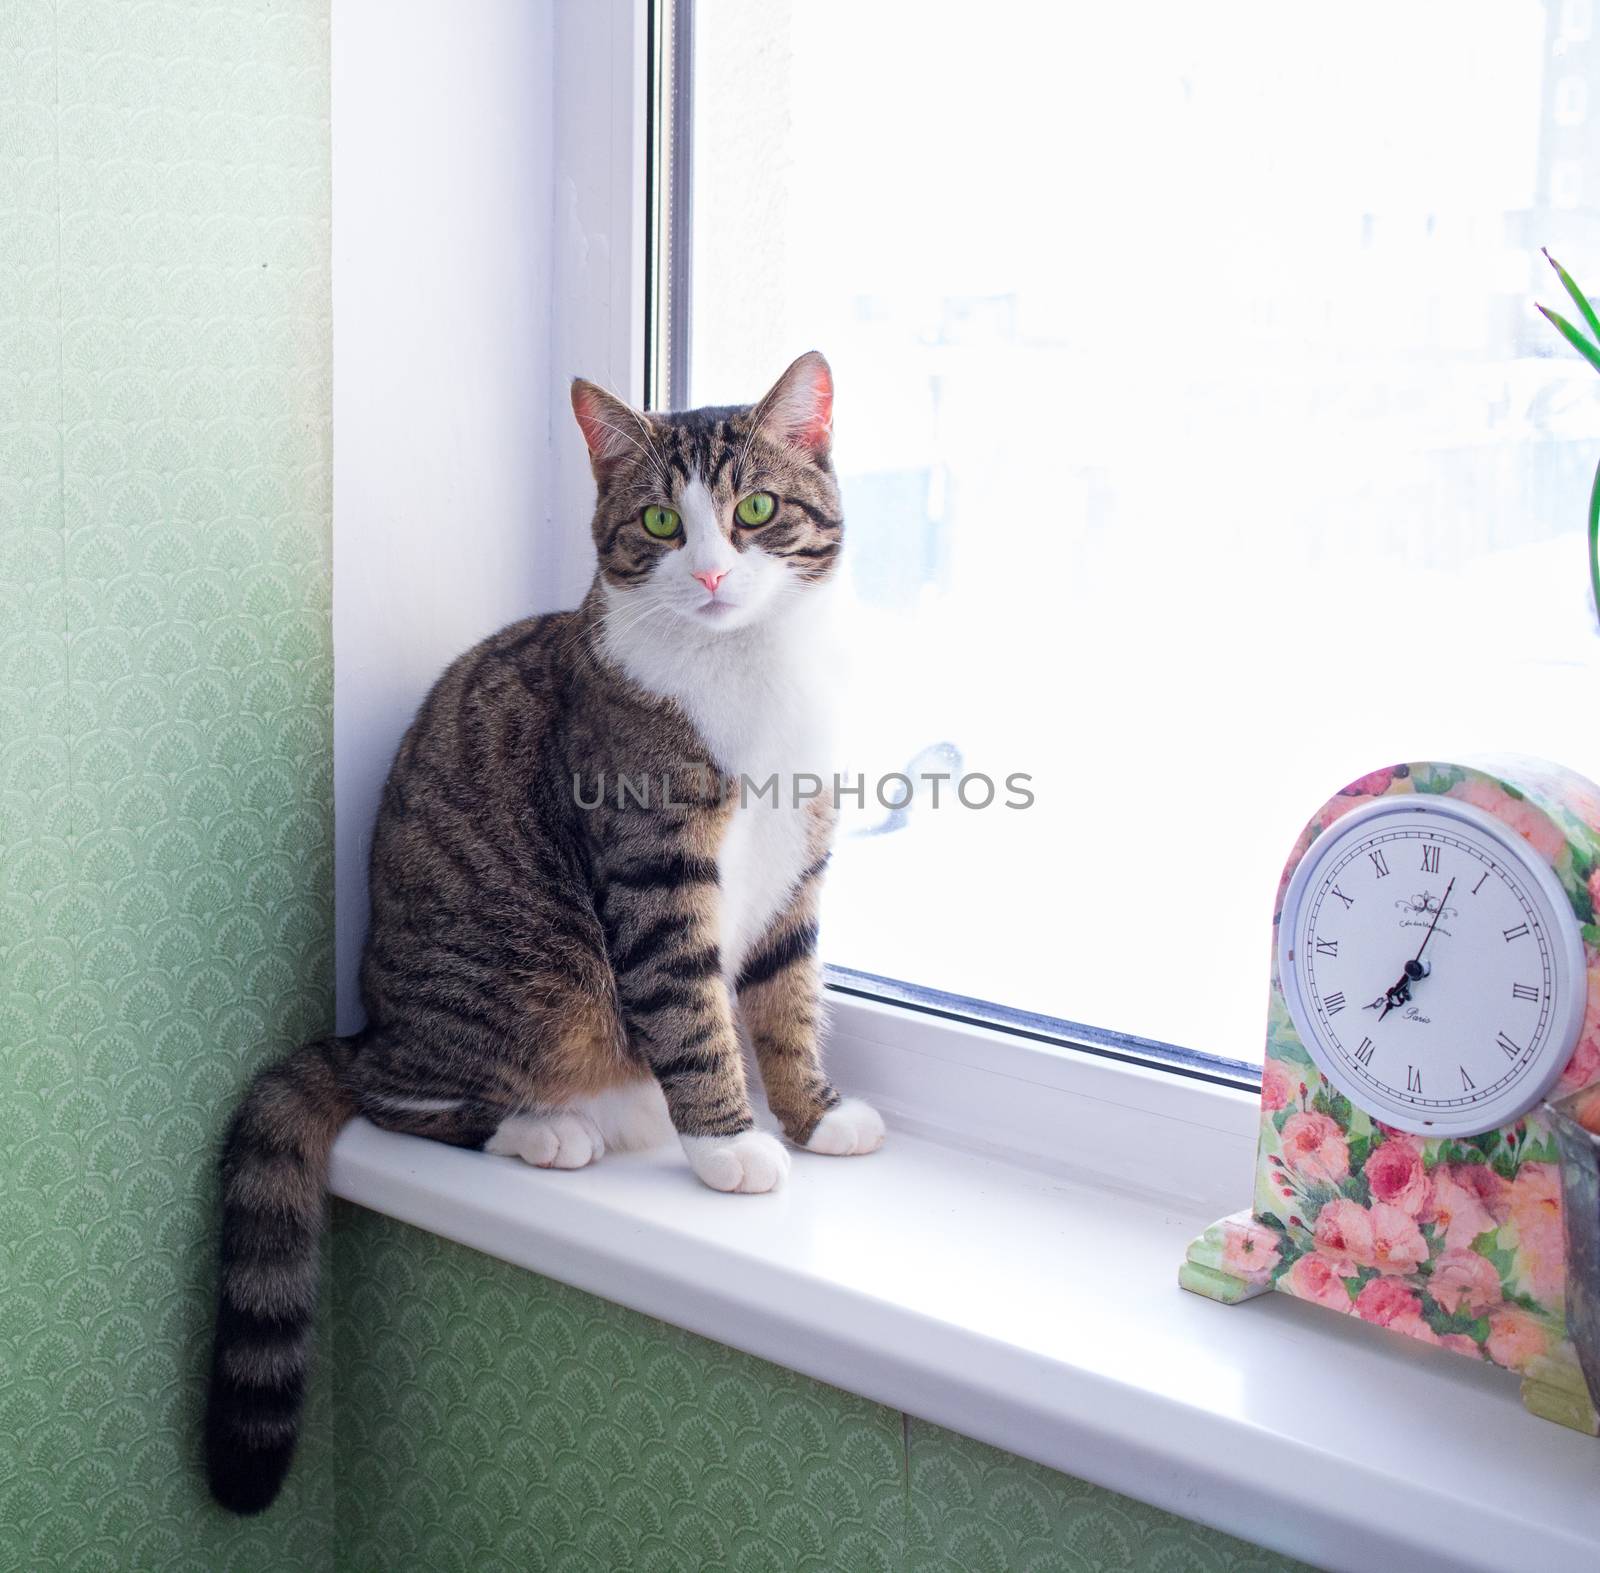 Domestic striped furry pet cat sits on windowsill near colorful floral clock